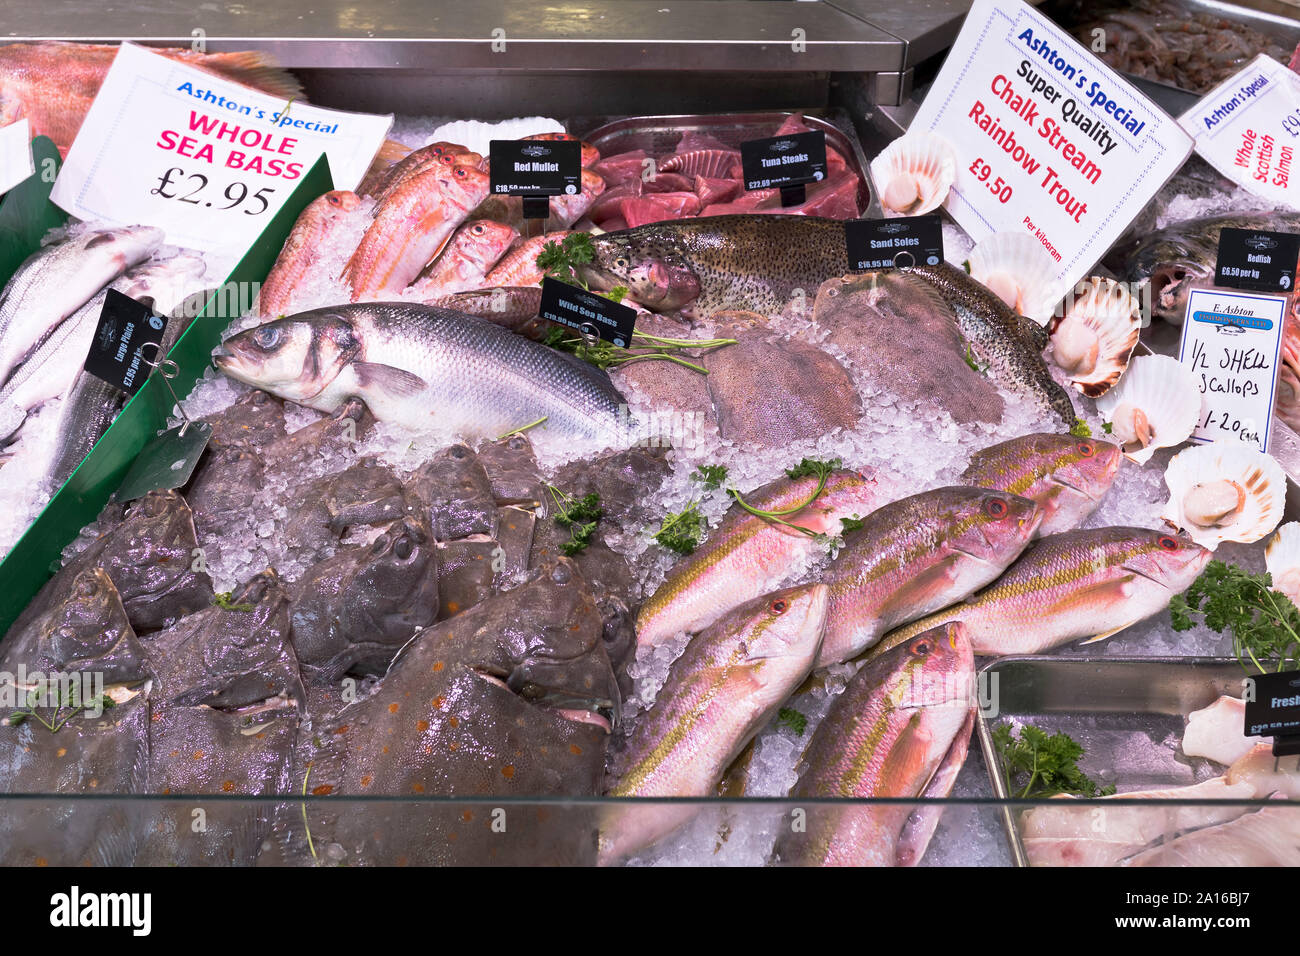 dh Fish Market CARDIFF WALES Fish sellers counter stall Welsh seafood fresh wet fish Stock Photo